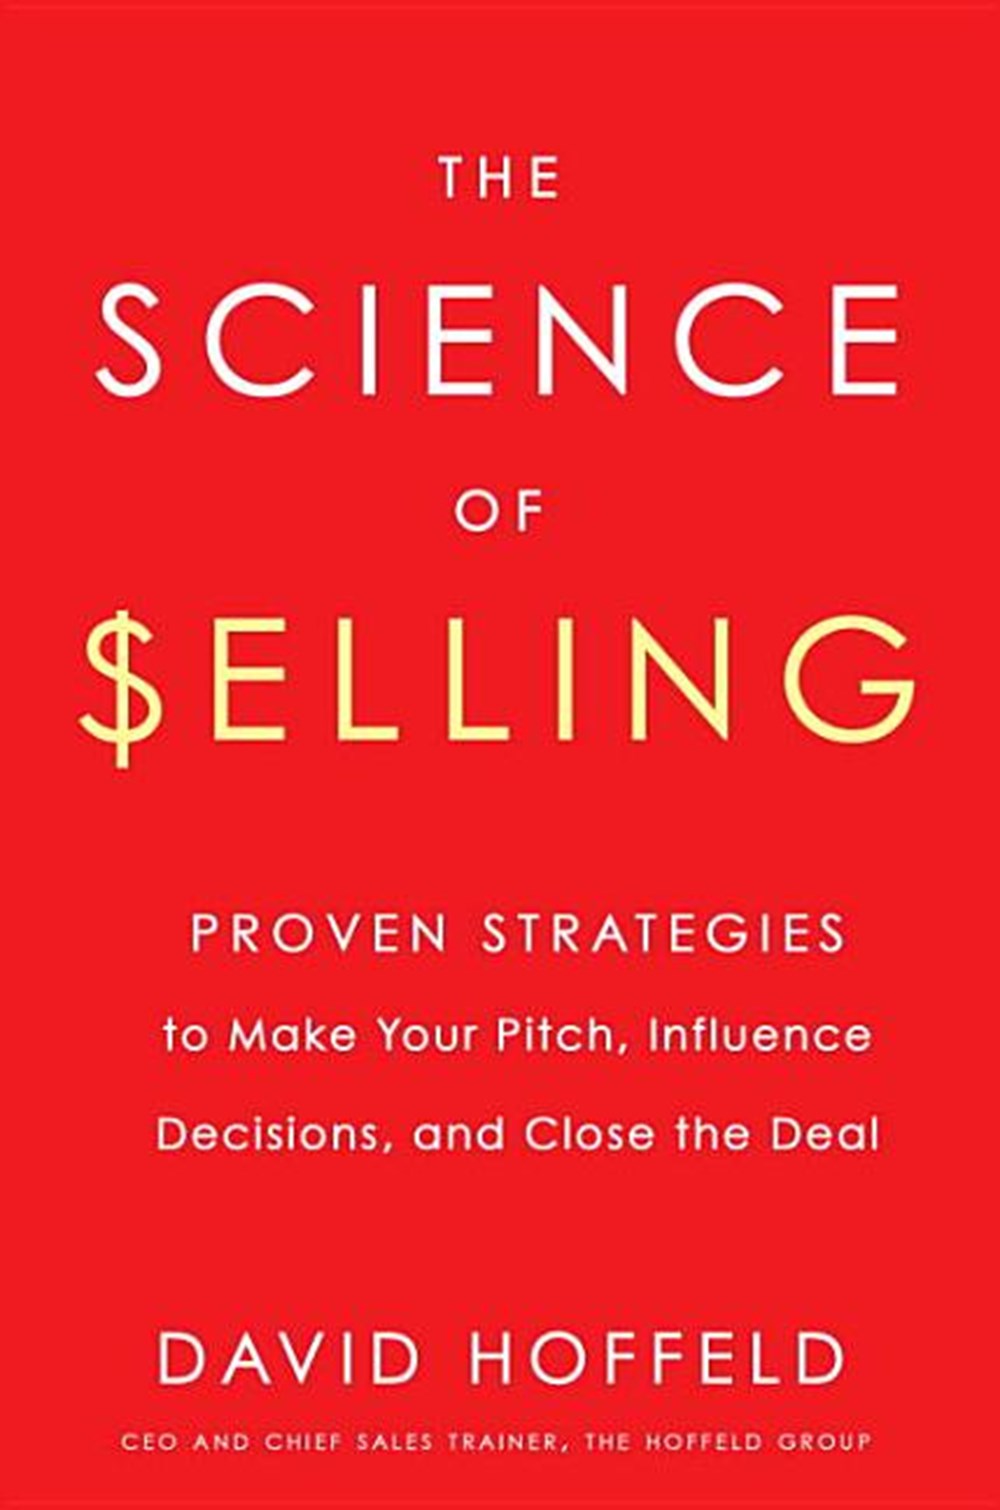 Science of Selling: Proven Strategies to Make Your Pitch, Influence Decisions, and Close the Deal